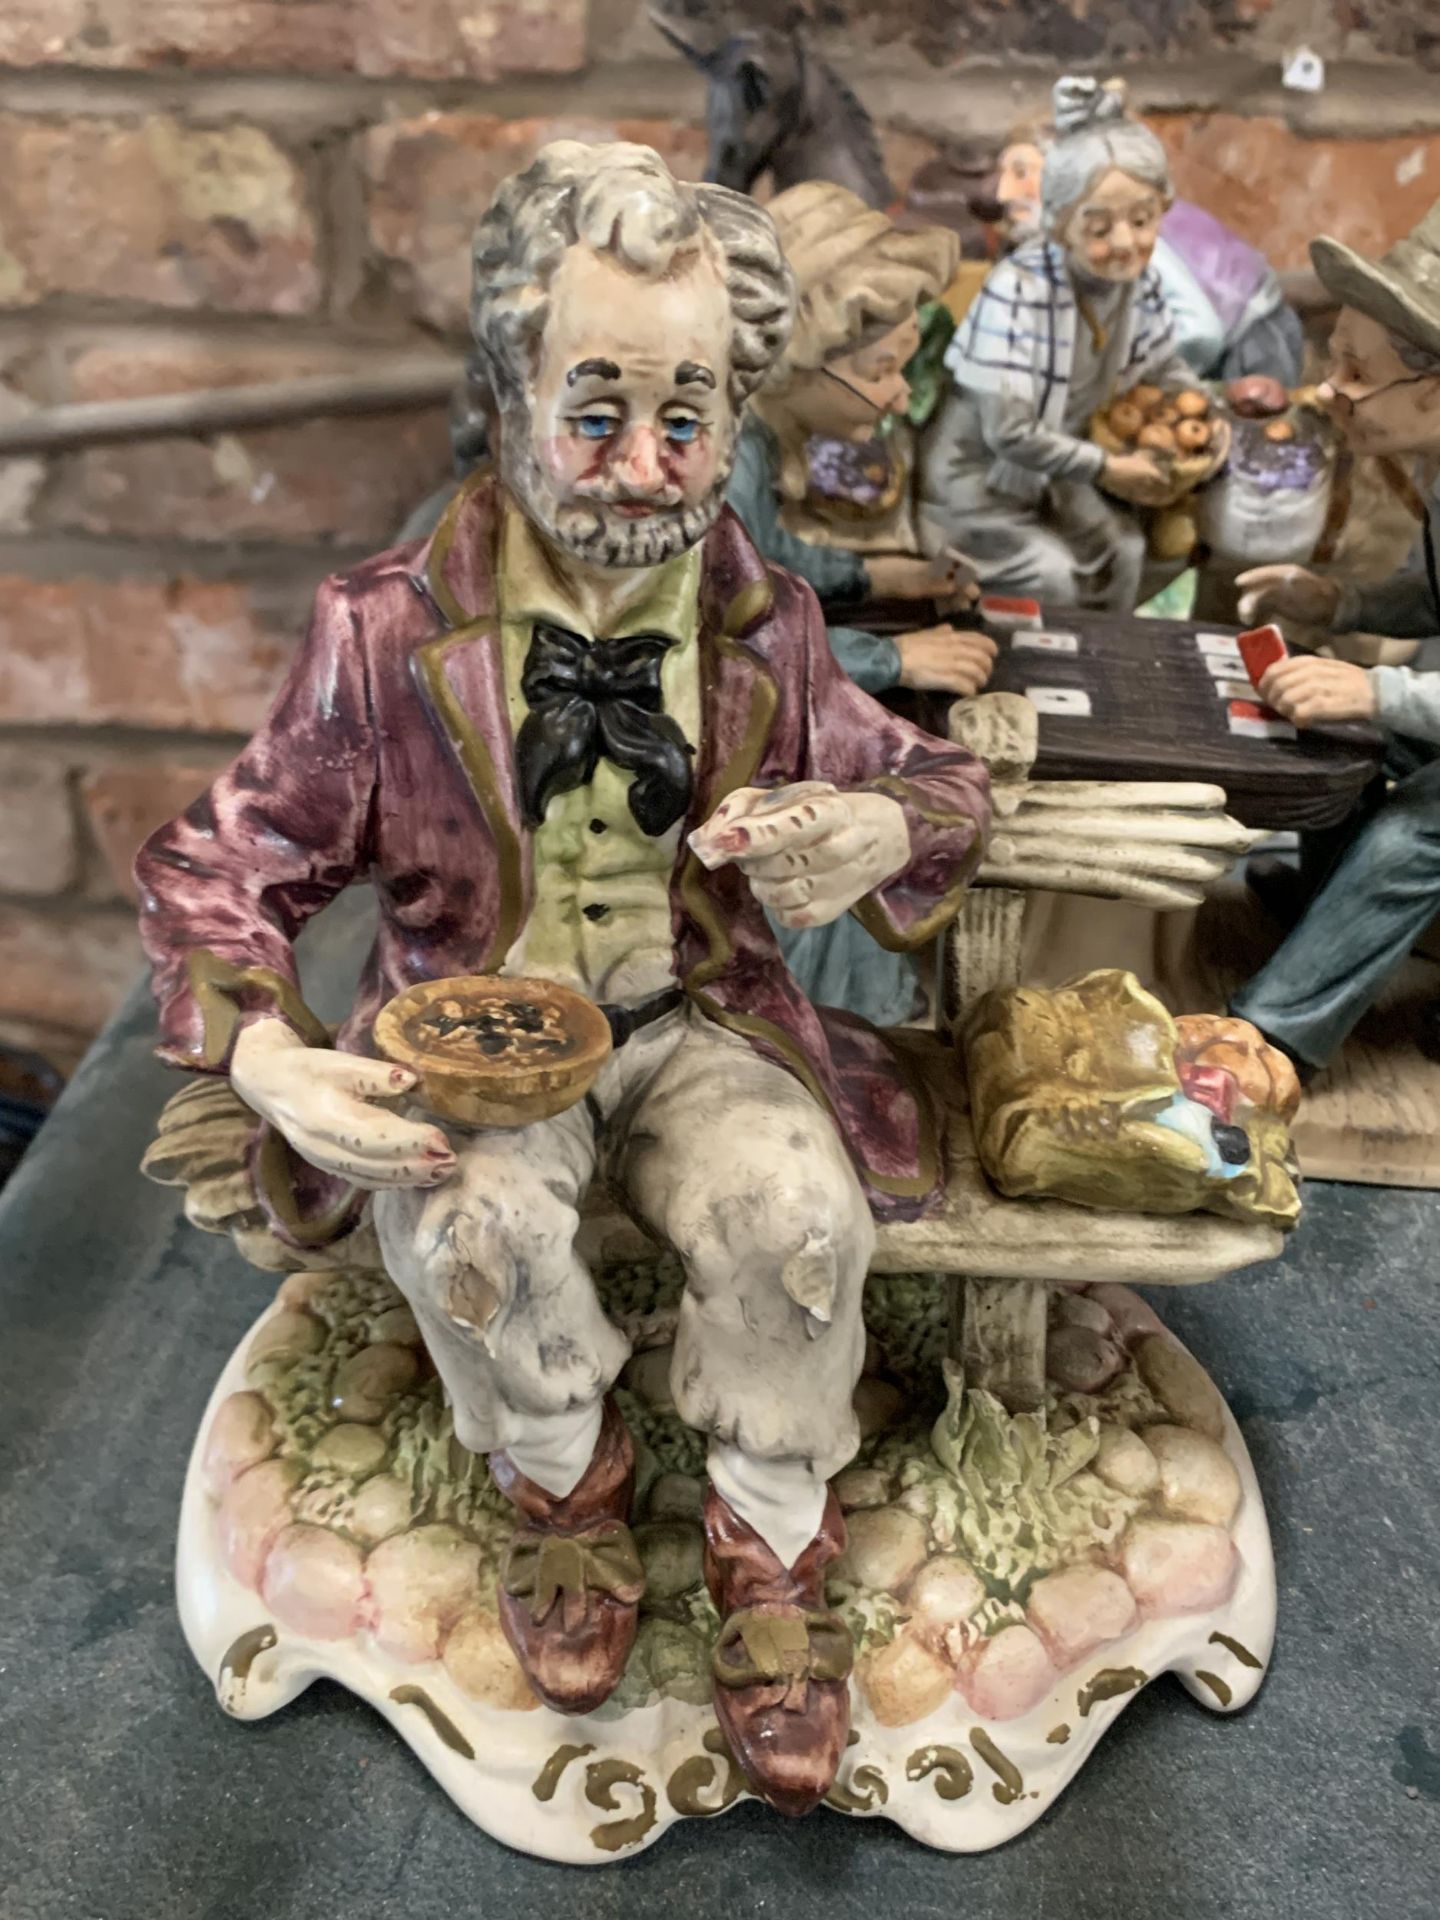 SIX CHALKWARE FIGURINES FEATURING A COUPLE PLAYING CARD GAMES, LADY WITH DONKEY AND CART ETC - Bild 4 aus 4